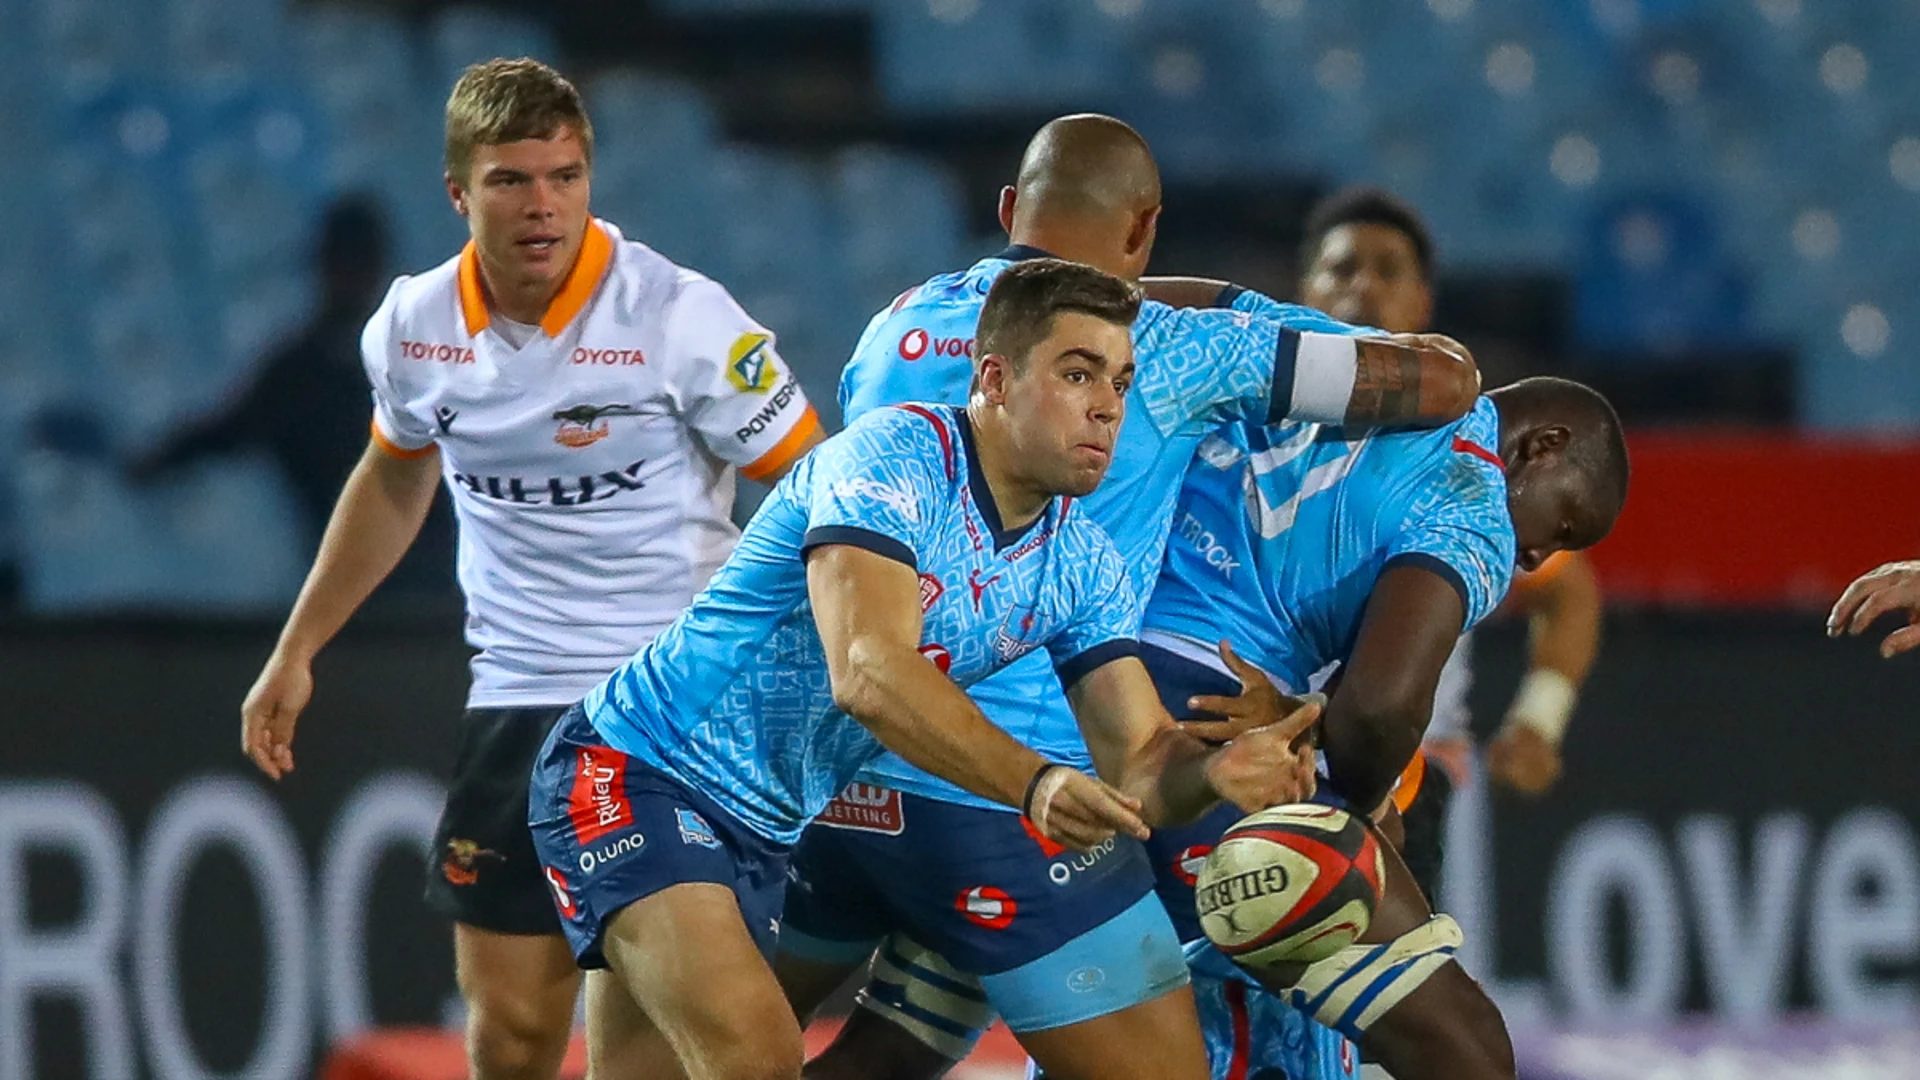 PREVIEW: All eyes on Bulls, Lions as coastal sides arrive desperate for points